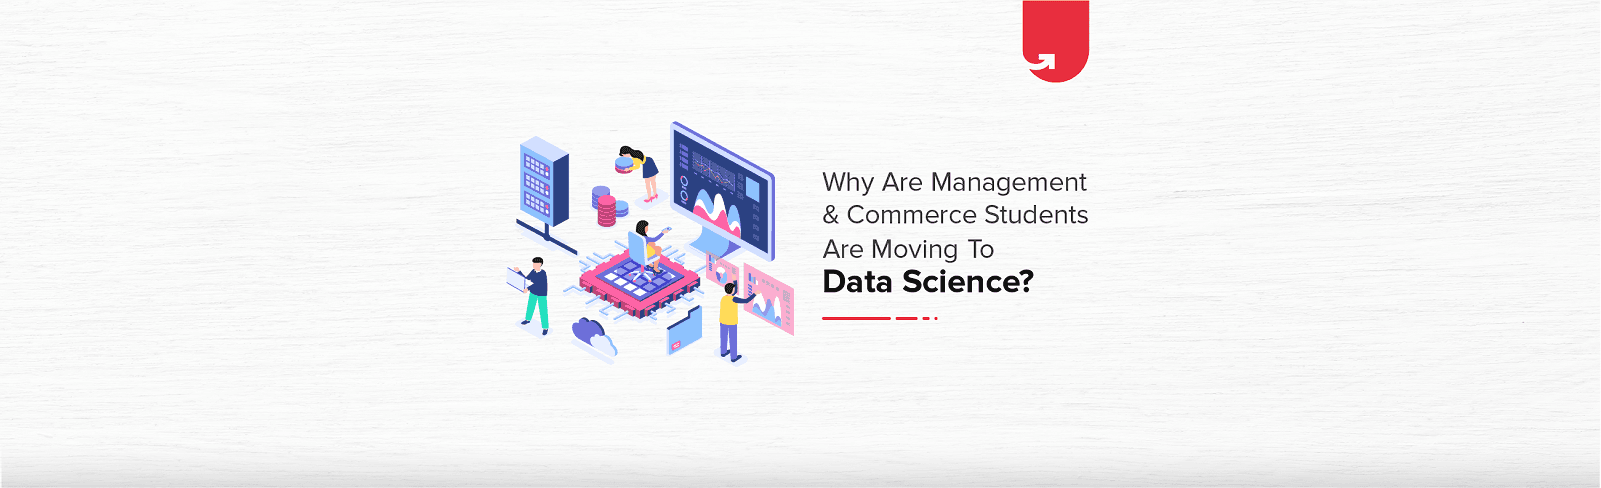 Why Management &amp; Commerce Students Are Moving to Data Science?